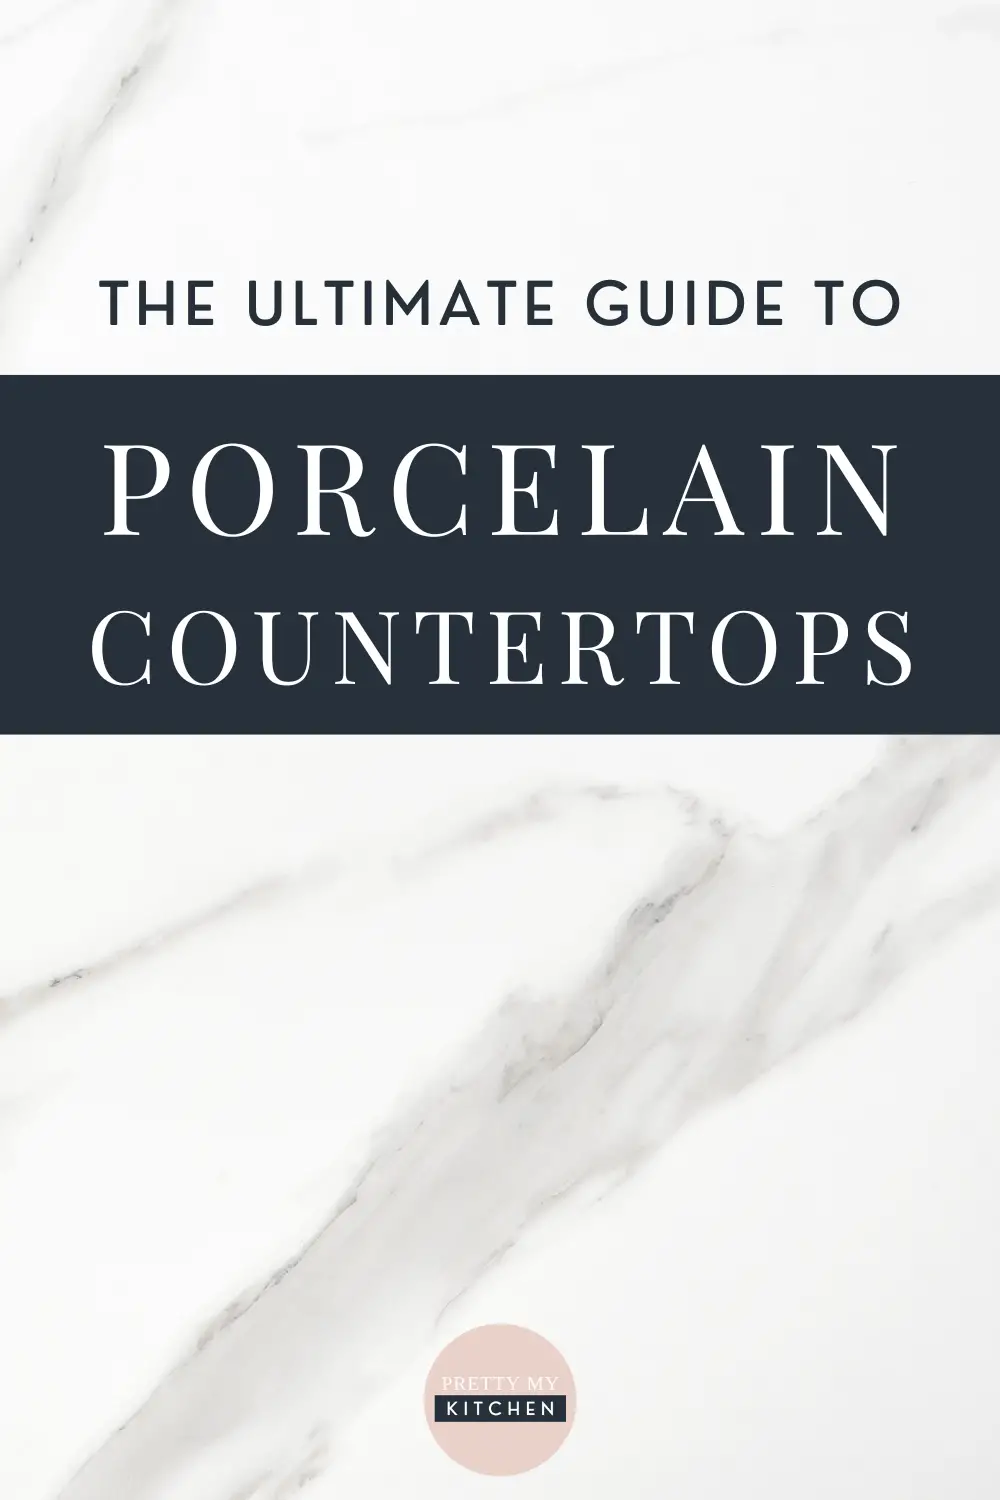 The Ultimate Guide to Porcelain Countertops